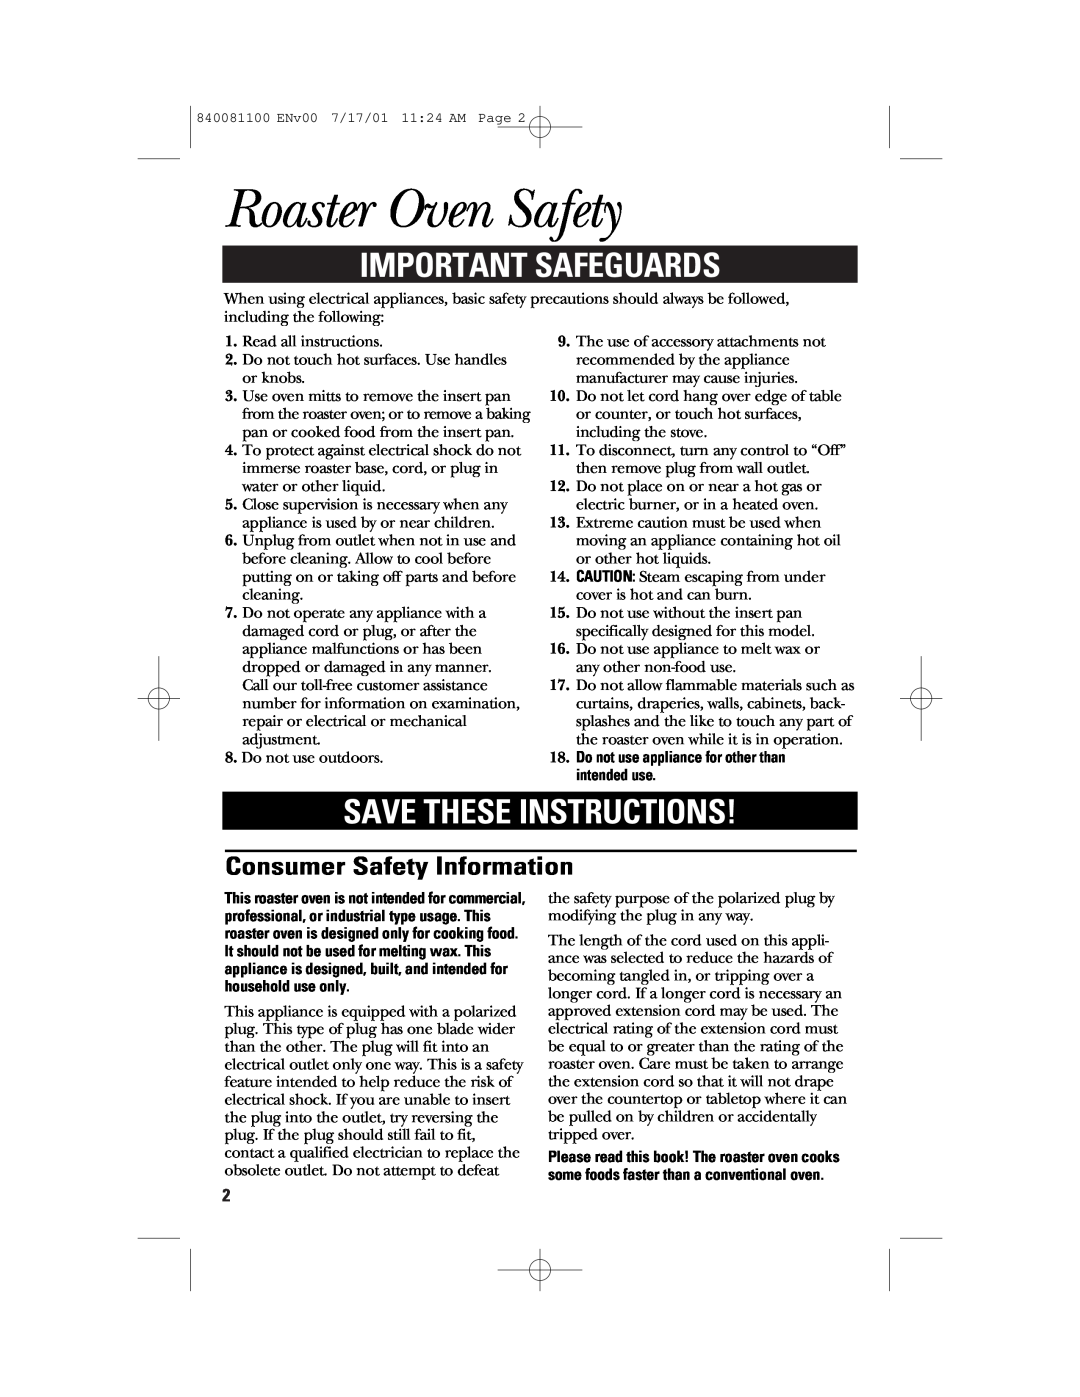 GE 840081100 manual Roaster Oven Safety, Important Safeguards, Save These Instructions, Consumer Safety Information 